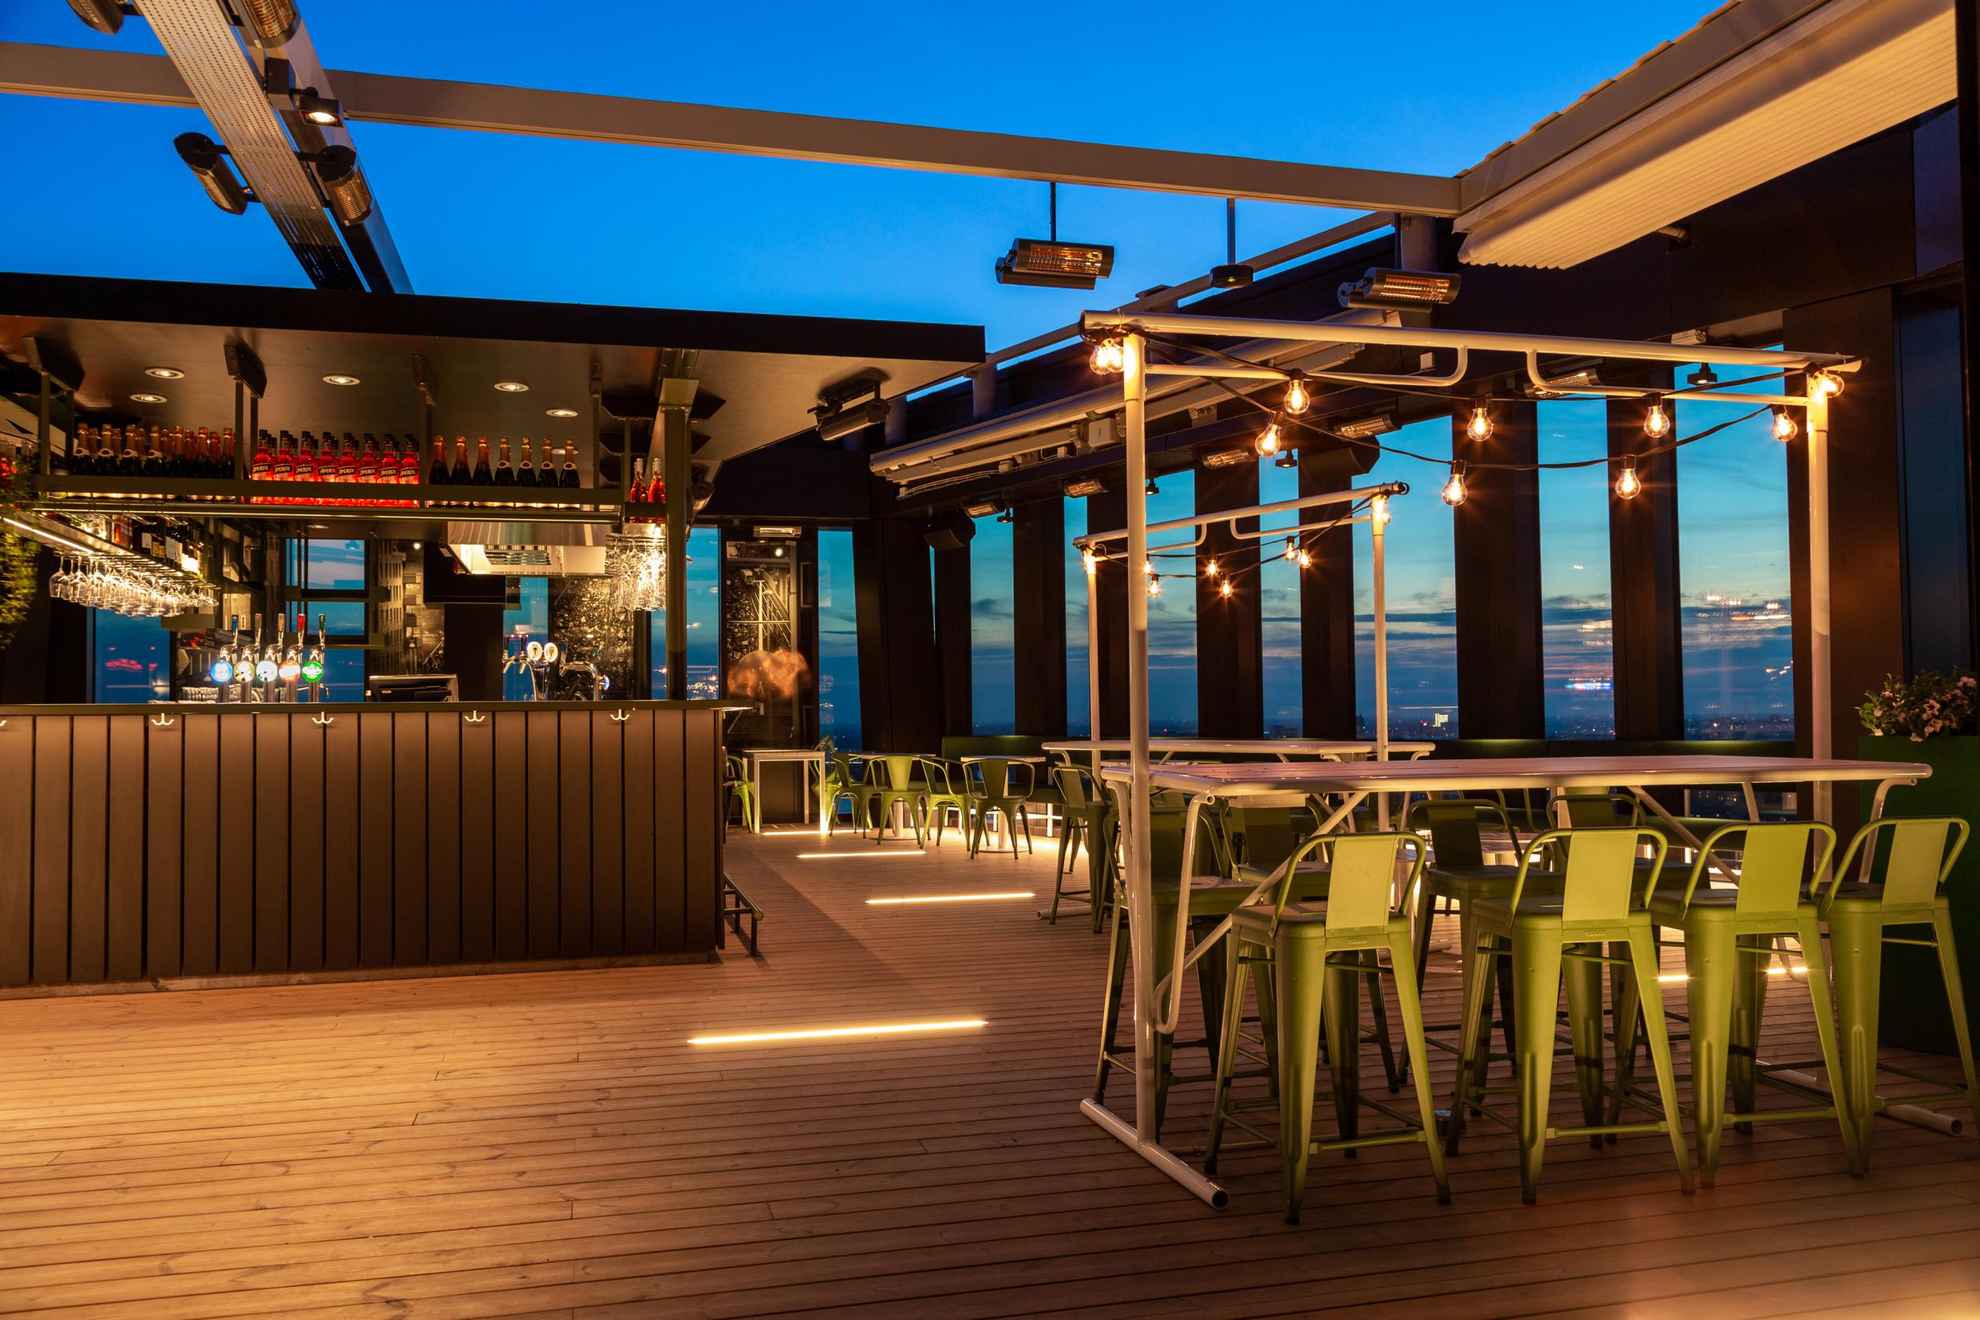 A rooftop bar with a seats and tables on a wooden floor.